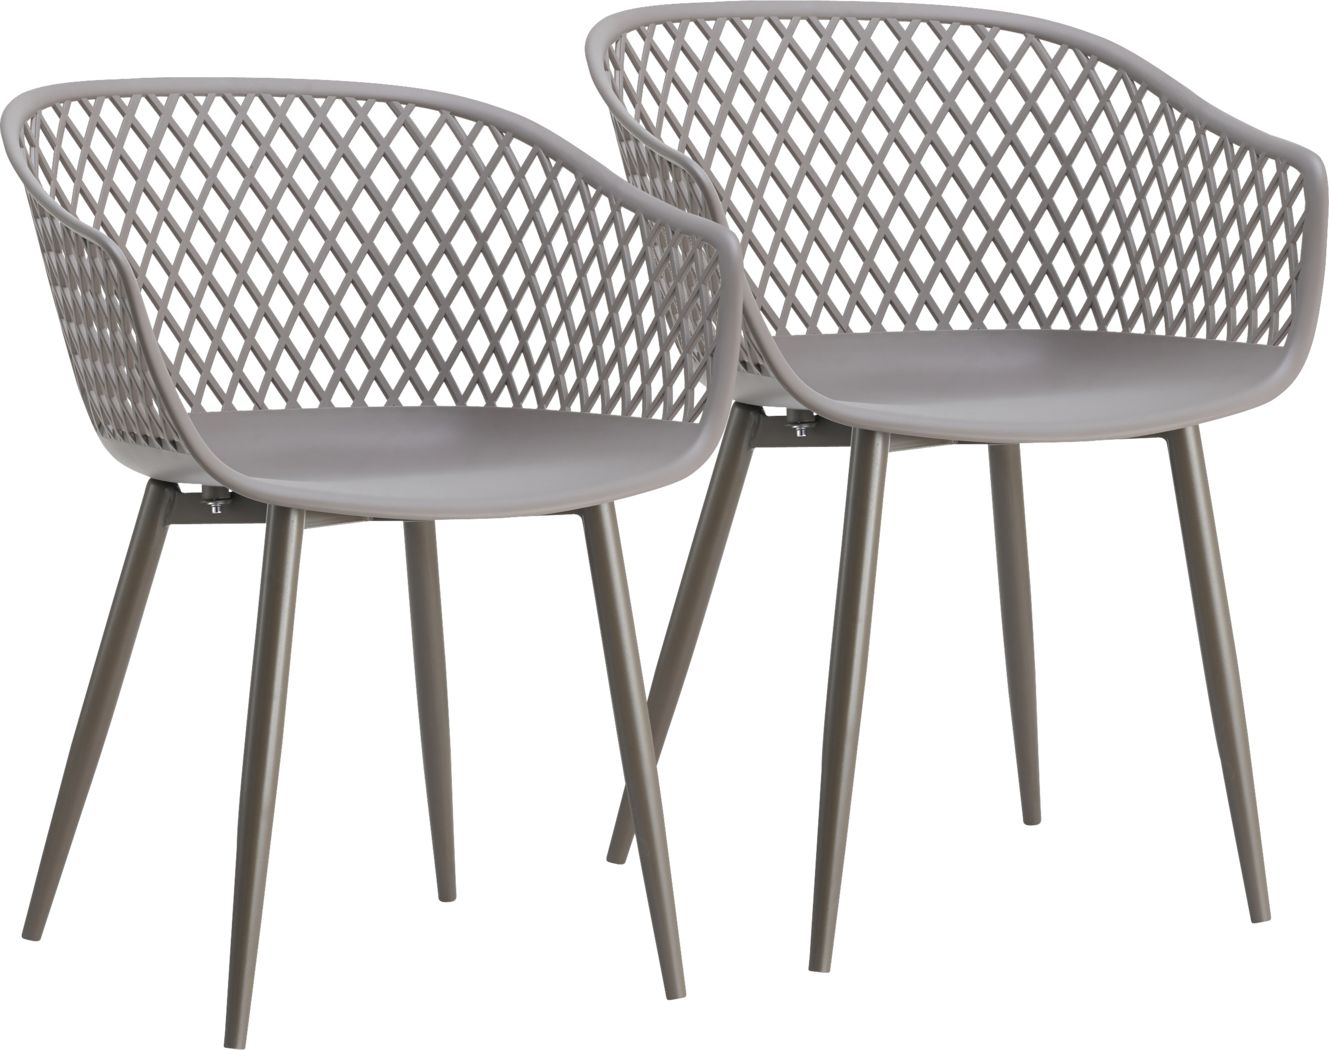 Patio Chairs Under 1000 For Sale Online